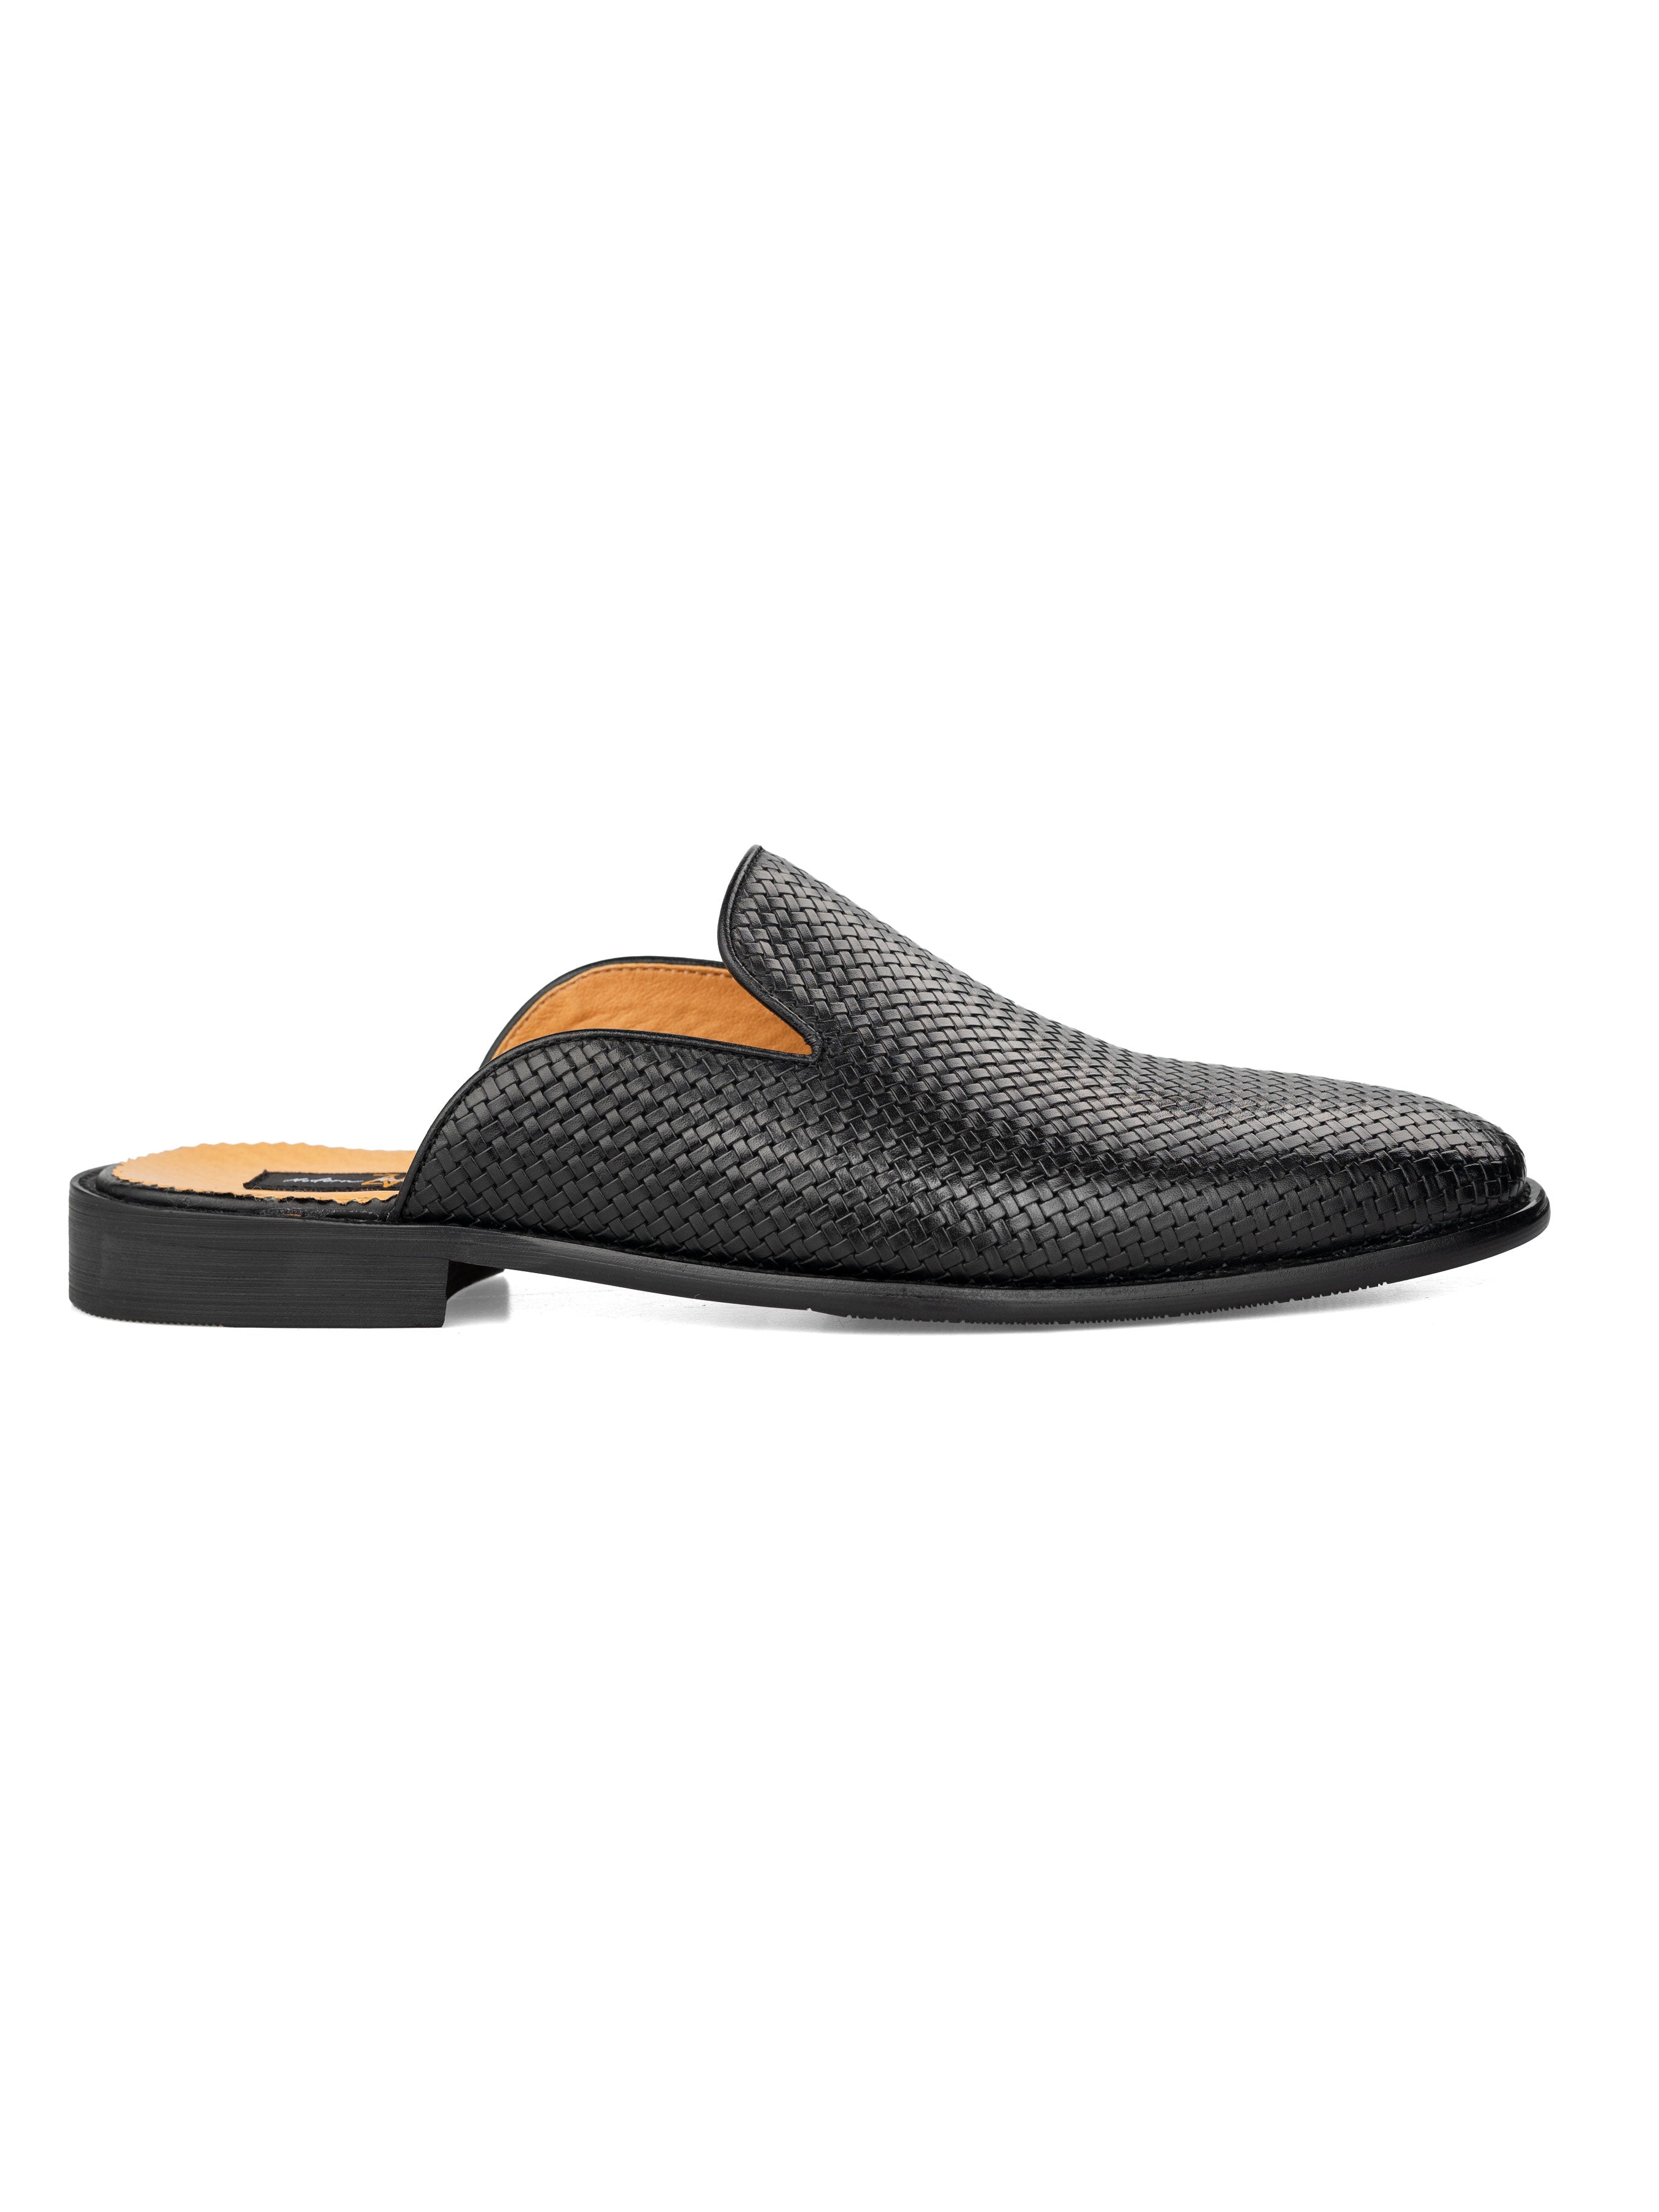 Mules - Black Woven Leather